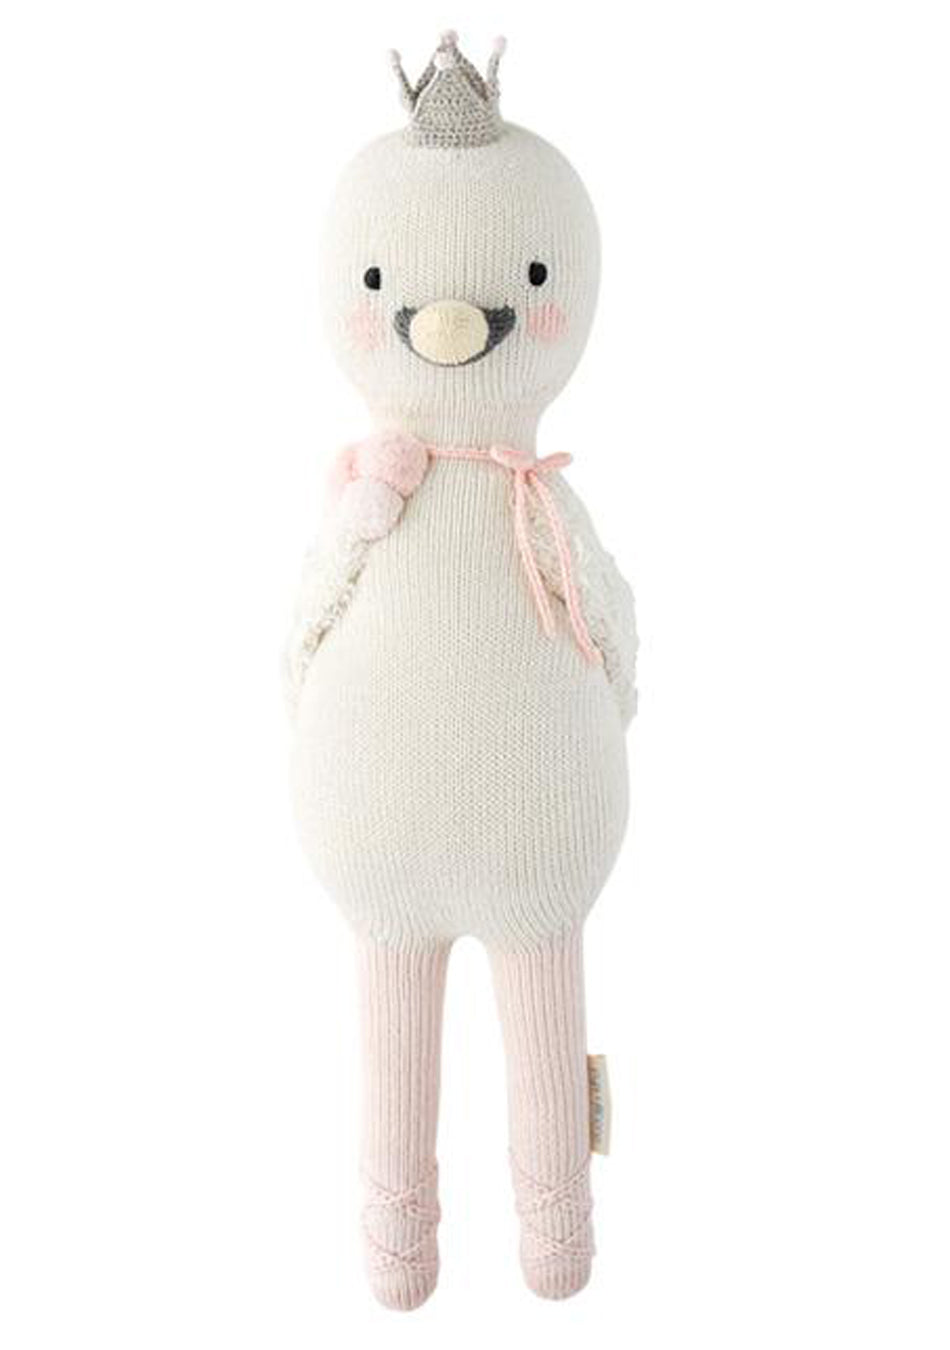 Harlow the Swan Knit Doll